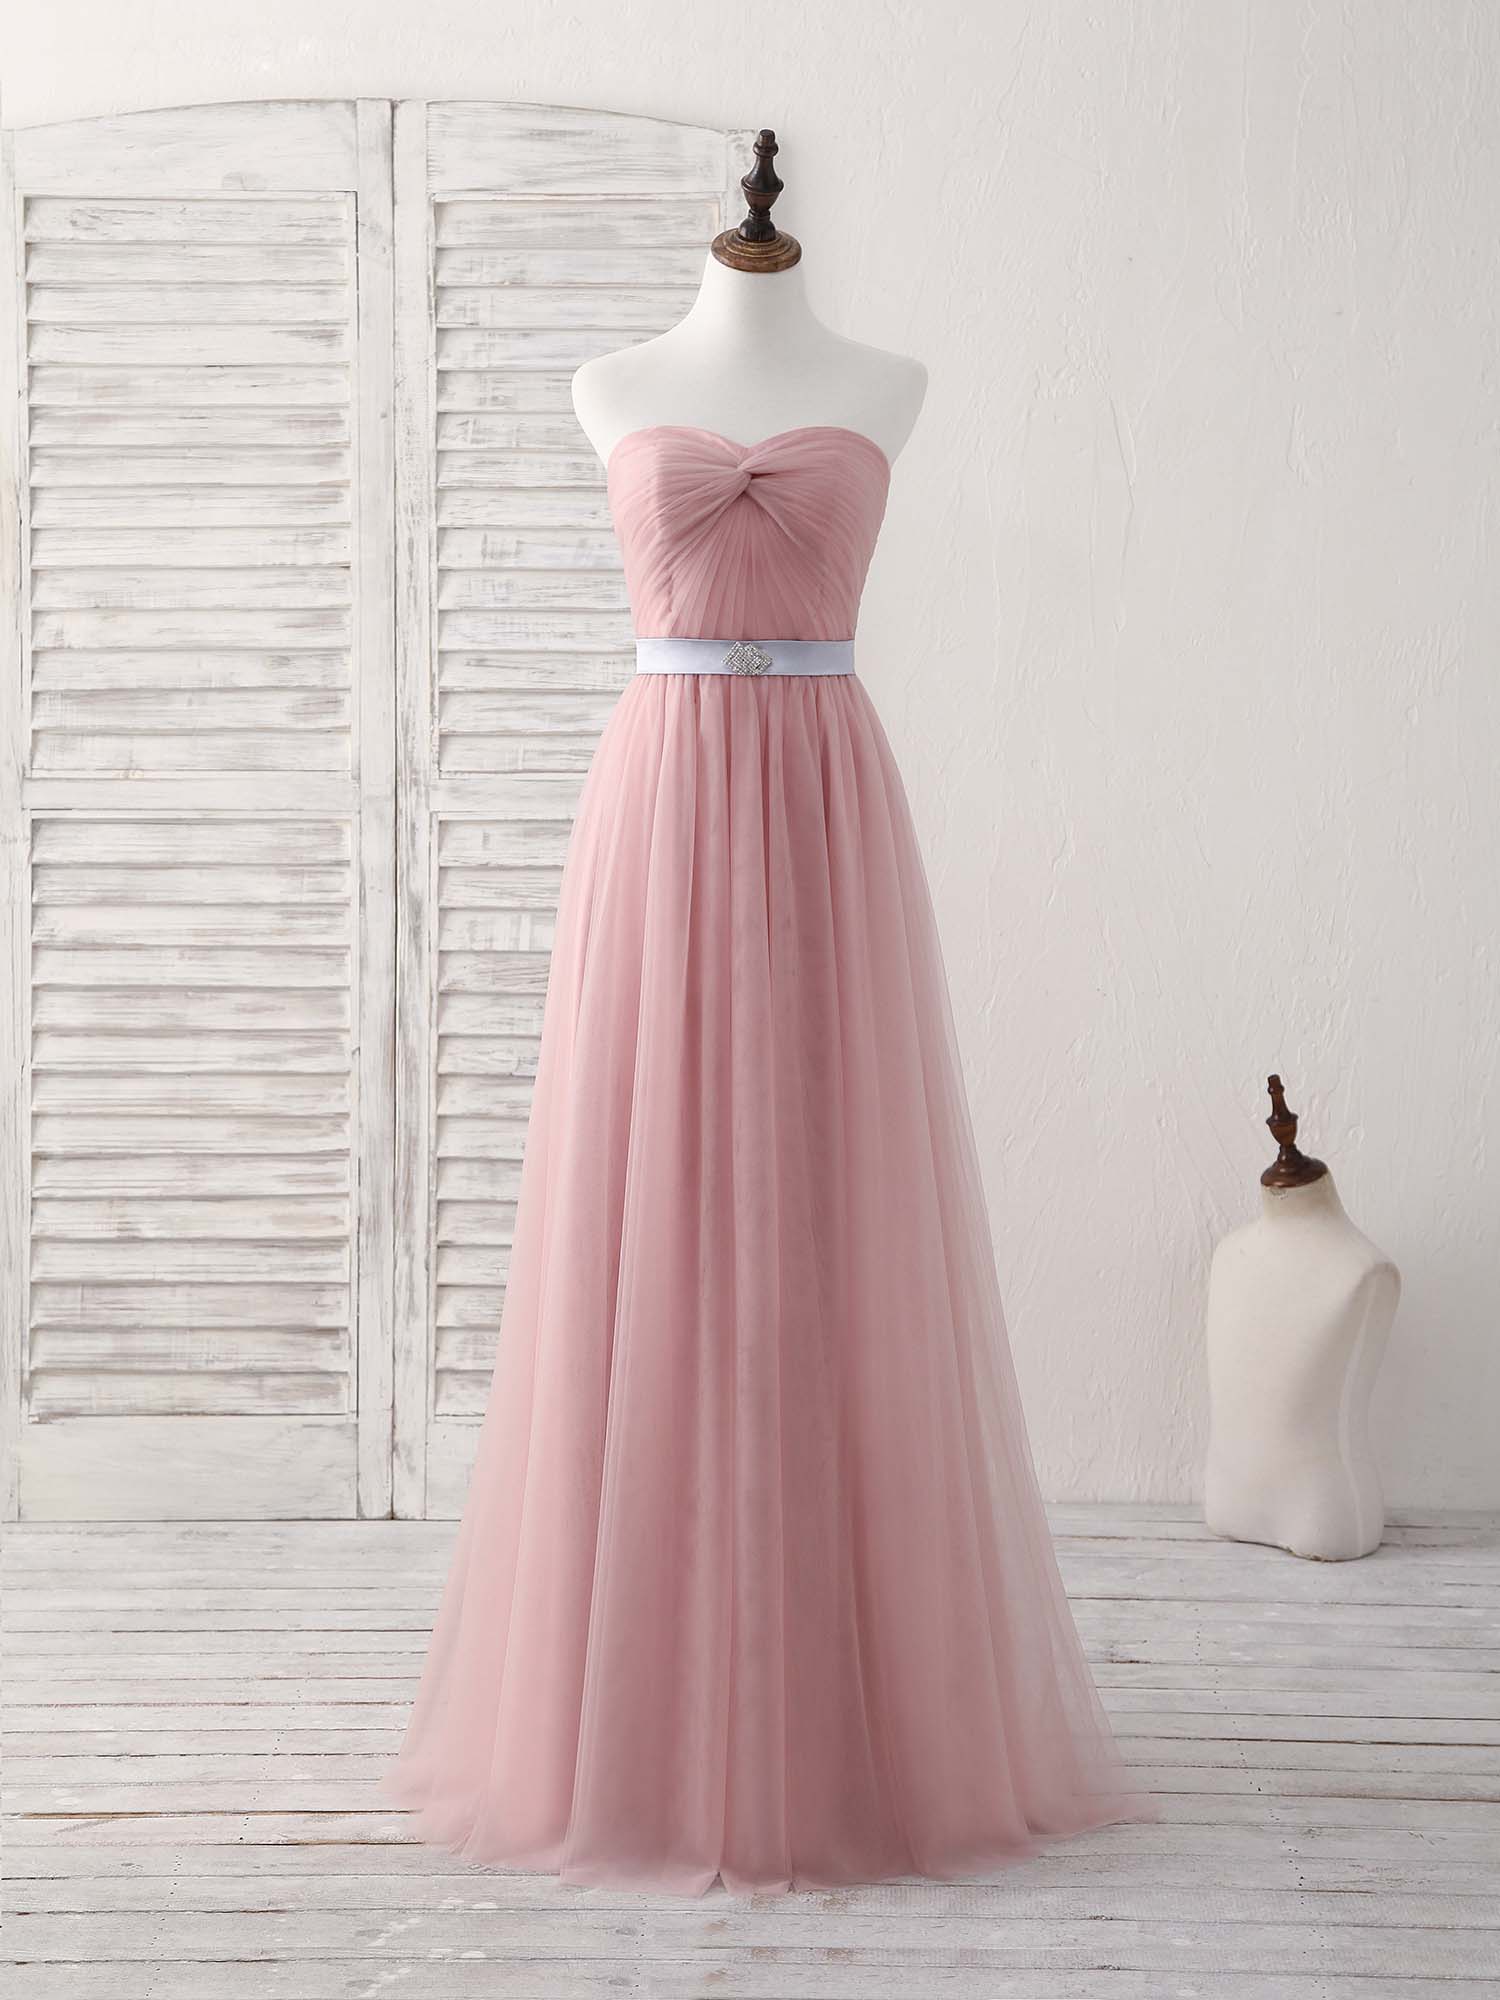 Pink Sweetheart Neck Tulle Long Prom Dress Outfits For Girls, Aline Pink Bridesmaid Dress